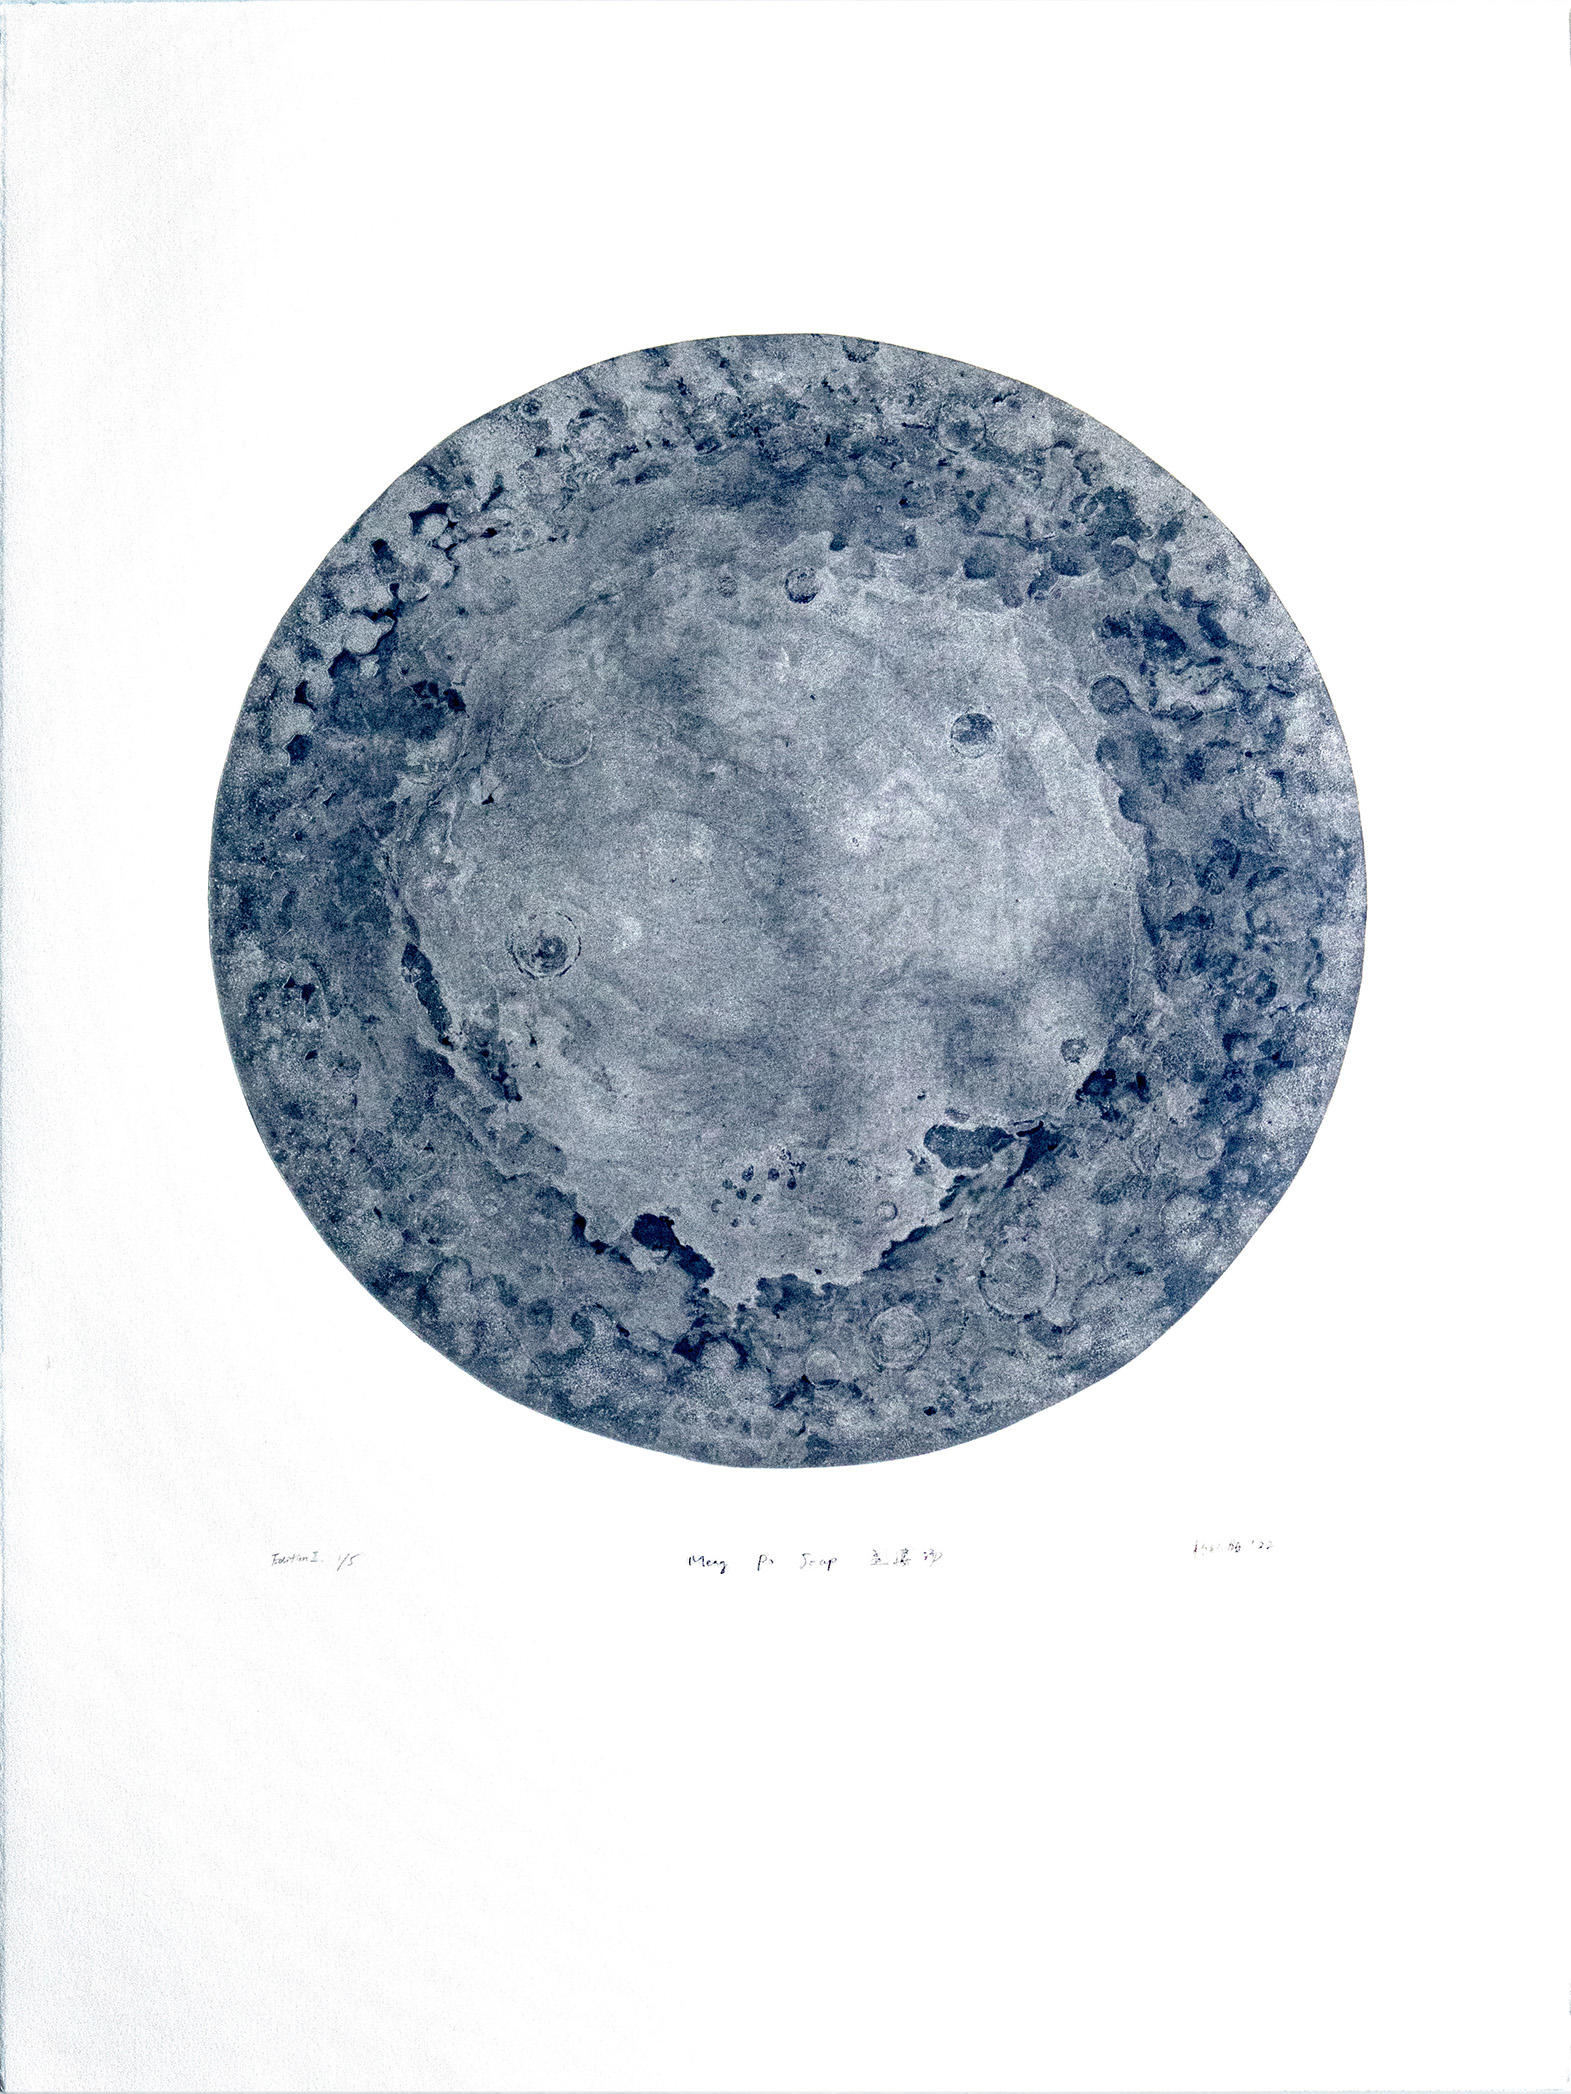 A large blue and silver moon, printed in intaglio on white paper